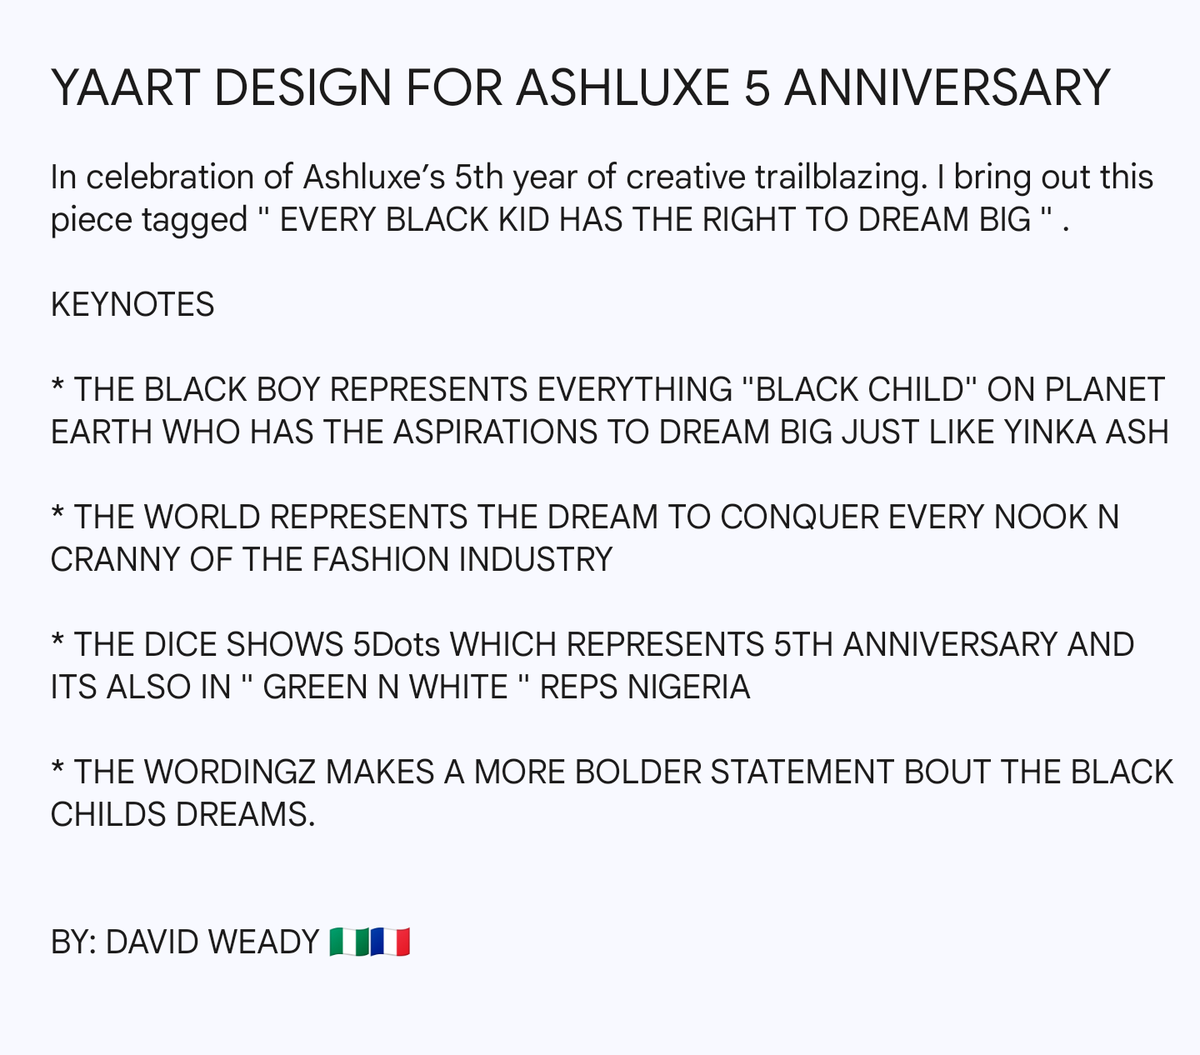 In celebration of Ashluxe’s 5th year of creative trailblazing creations. I bring out this piece tagged ' EVERY BLACK KID HAS THE RIGHT TO DREAM BIG ' to commensurate the achievement of the BRAND ASHLUXE. #Ashluxe5Design @ASHLUXESOCIETY @yinka_ash